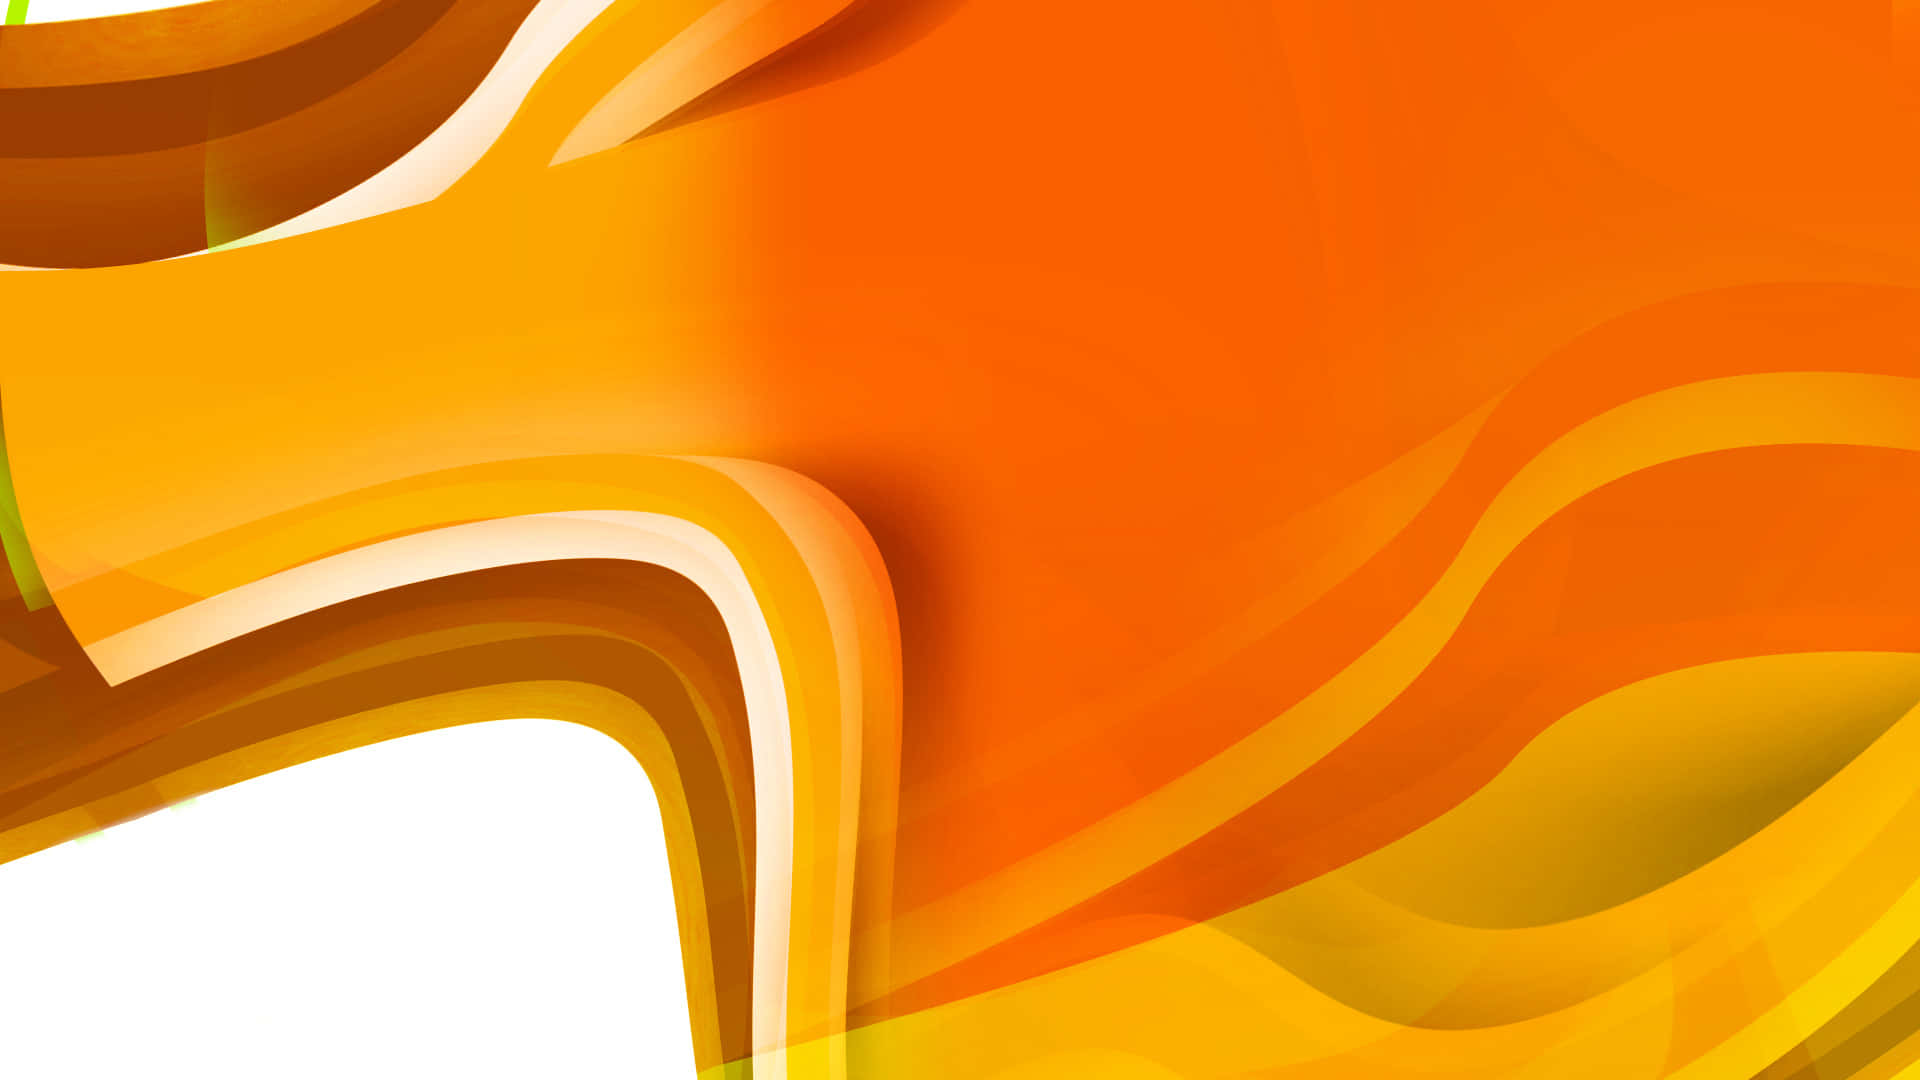 Bright, Liveliness and Vibrancy of Orange Abstract Background